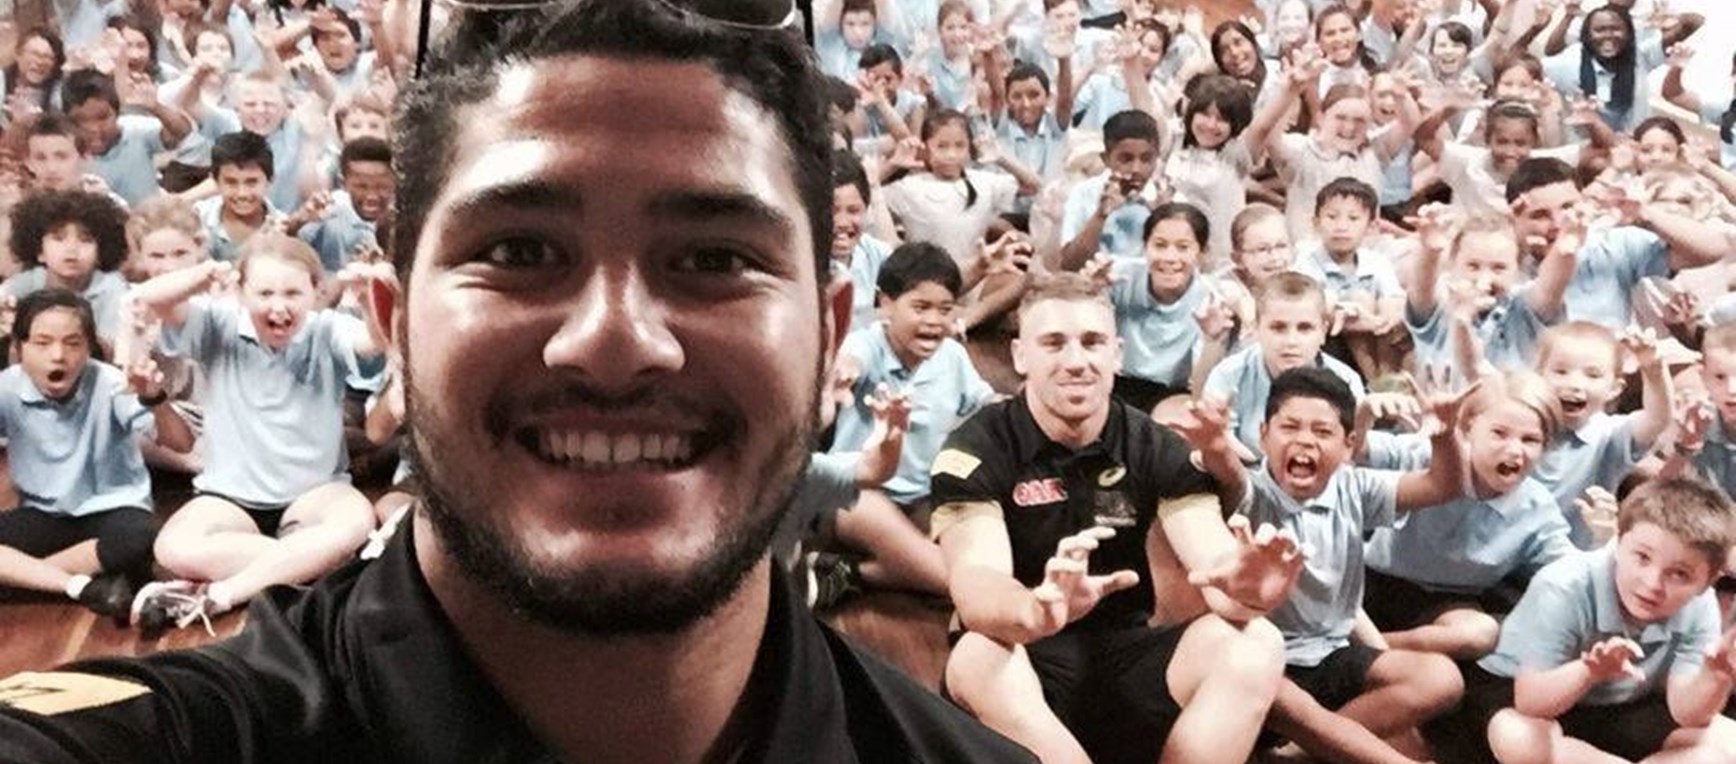 Gallery: Panthers Go Back To School